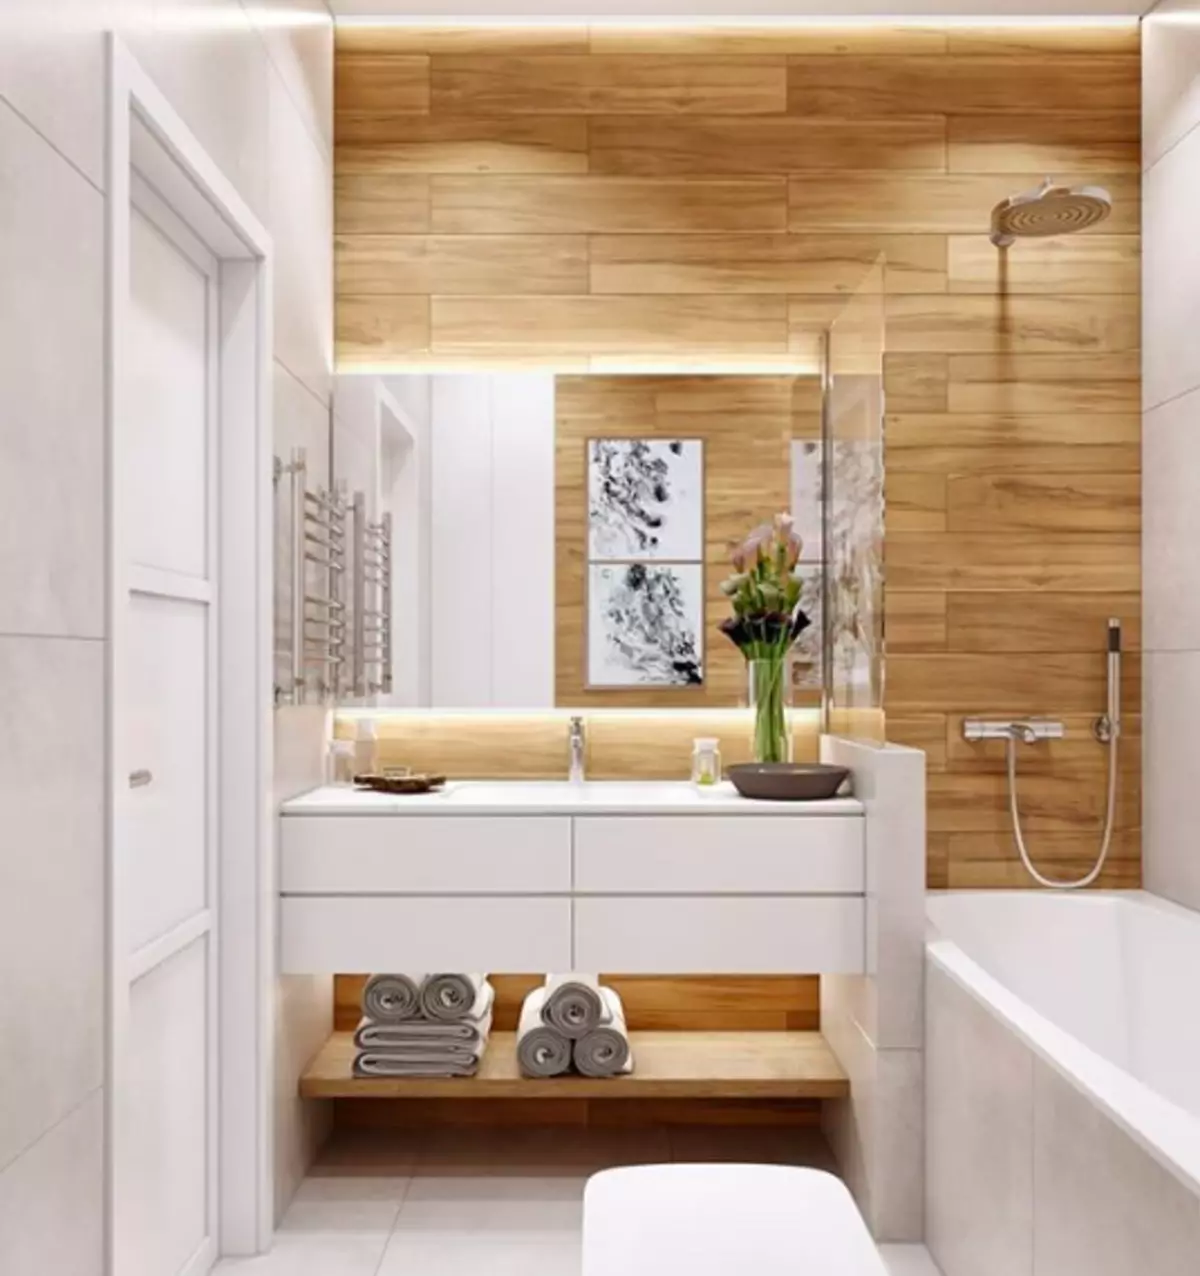 How to zonit combined bathroom: 6 stylish and practical ideas 10611_14